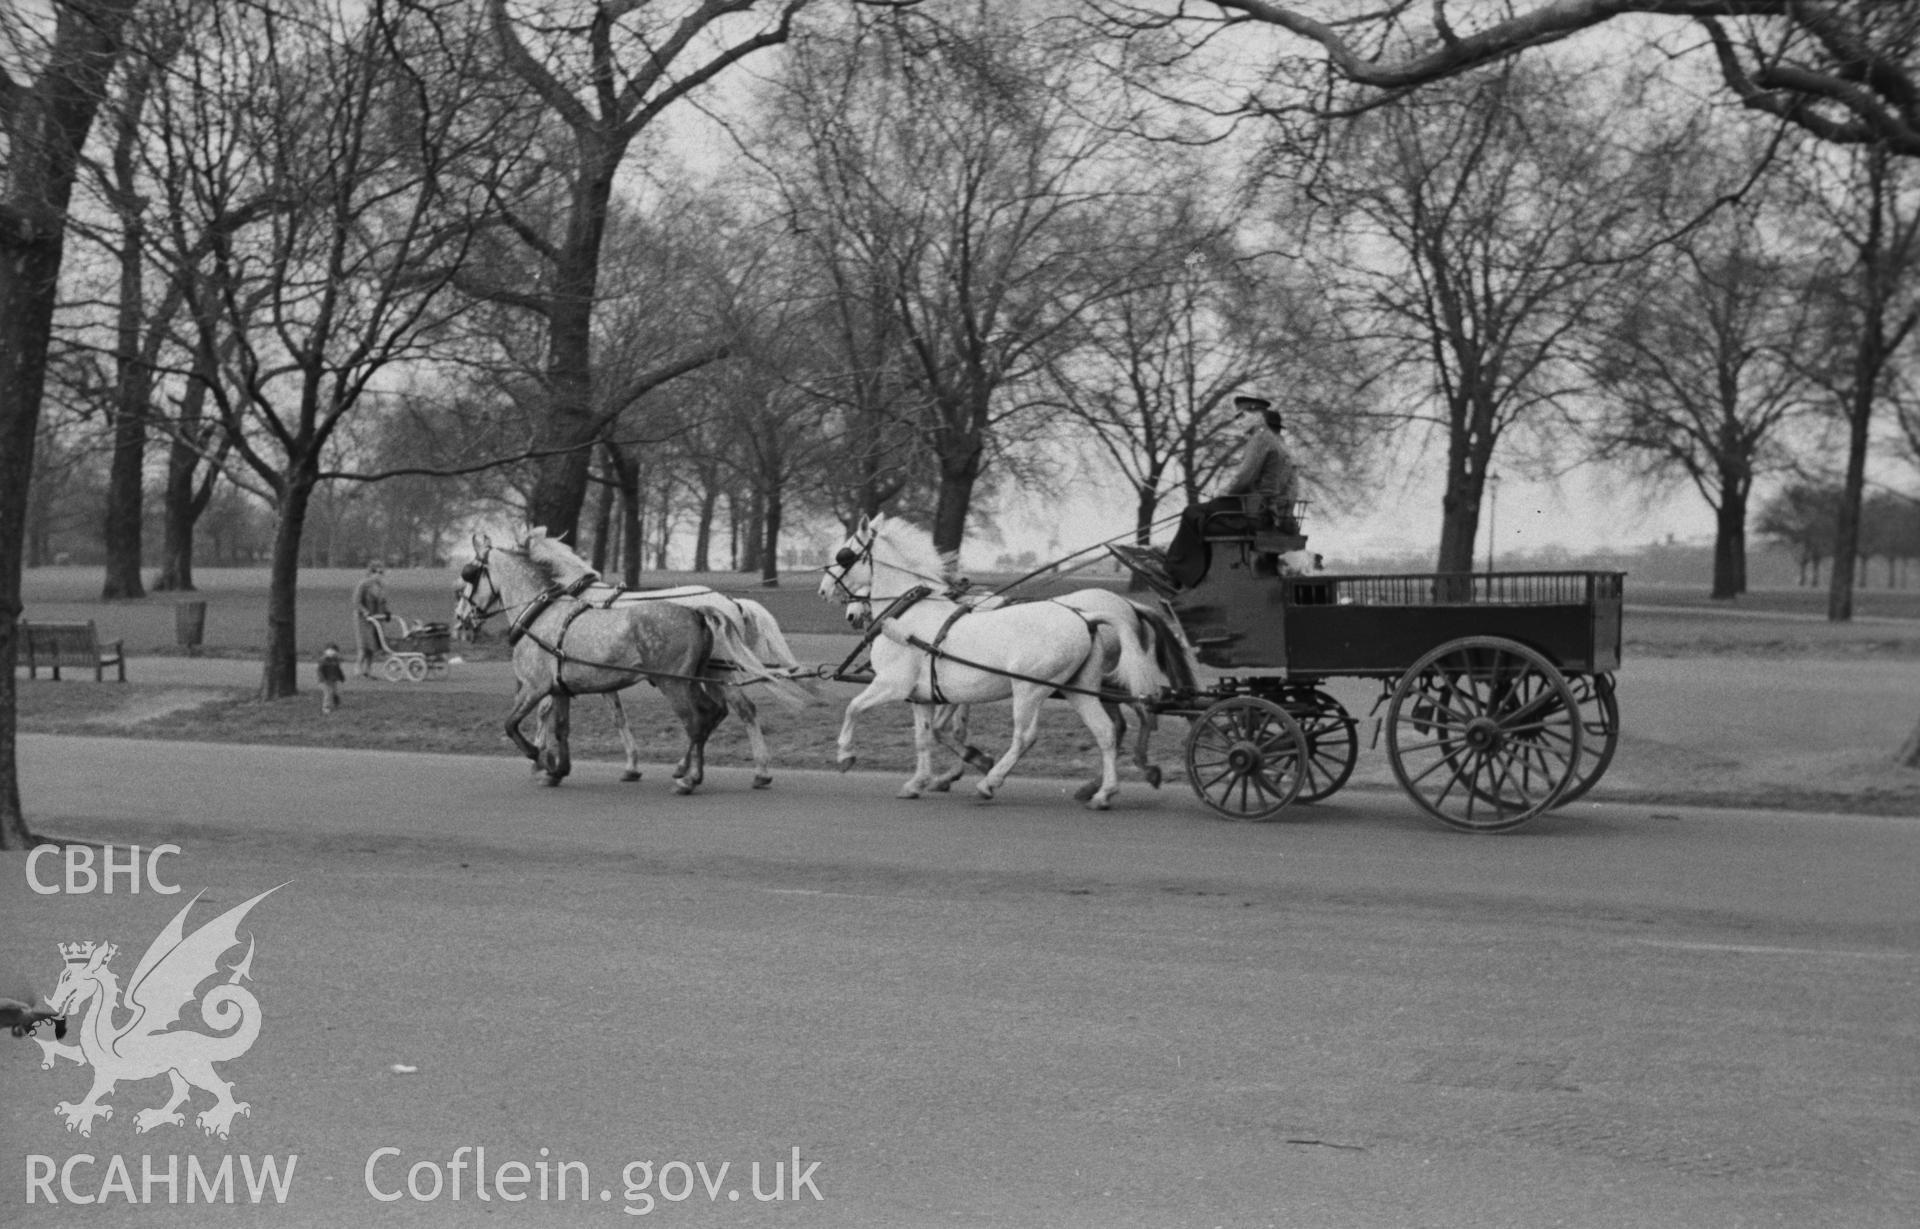 Black and White photograph showing horse-drawn carriage in London park.